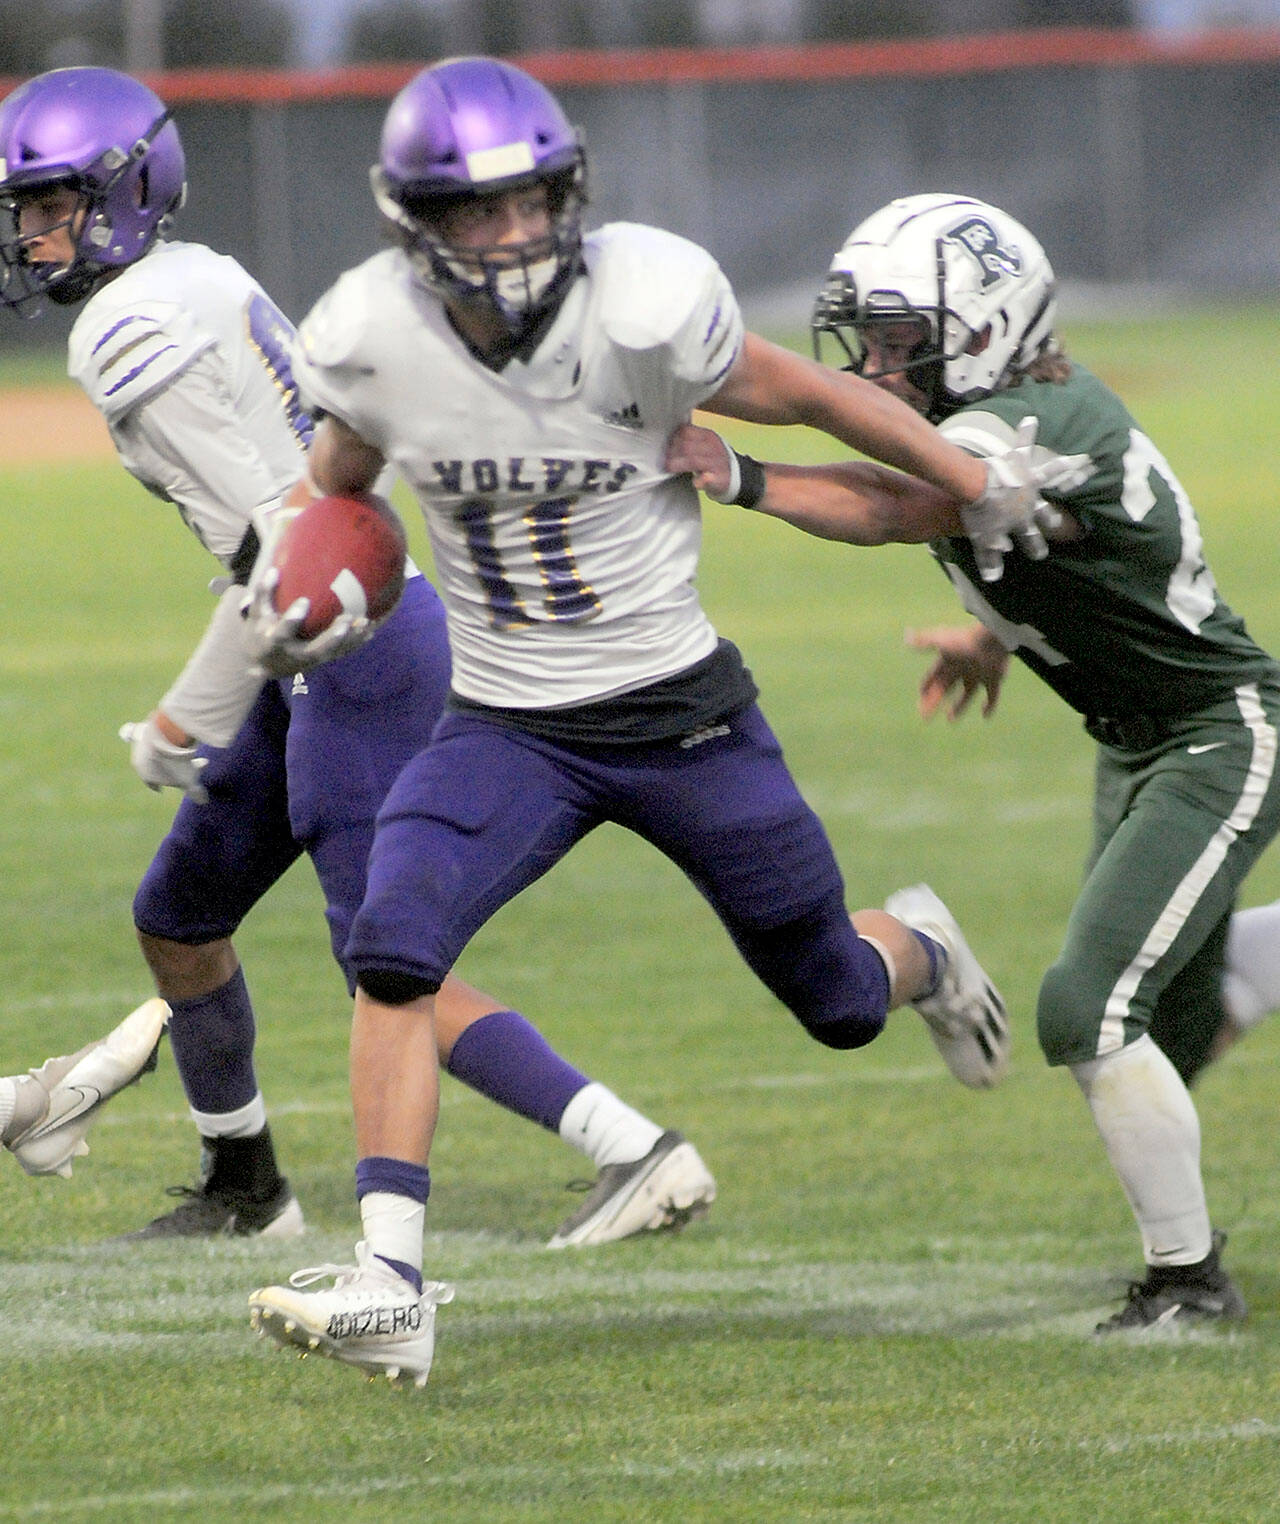 File photo byKeith Thorpe/Olympic Peninsula News group / Sequim’s Aiden Gockerell, pictured here fending off a would-be tackle by Port Angeles’ James Browning in September, was named an all-Olympic League first teamer on offense and defense.